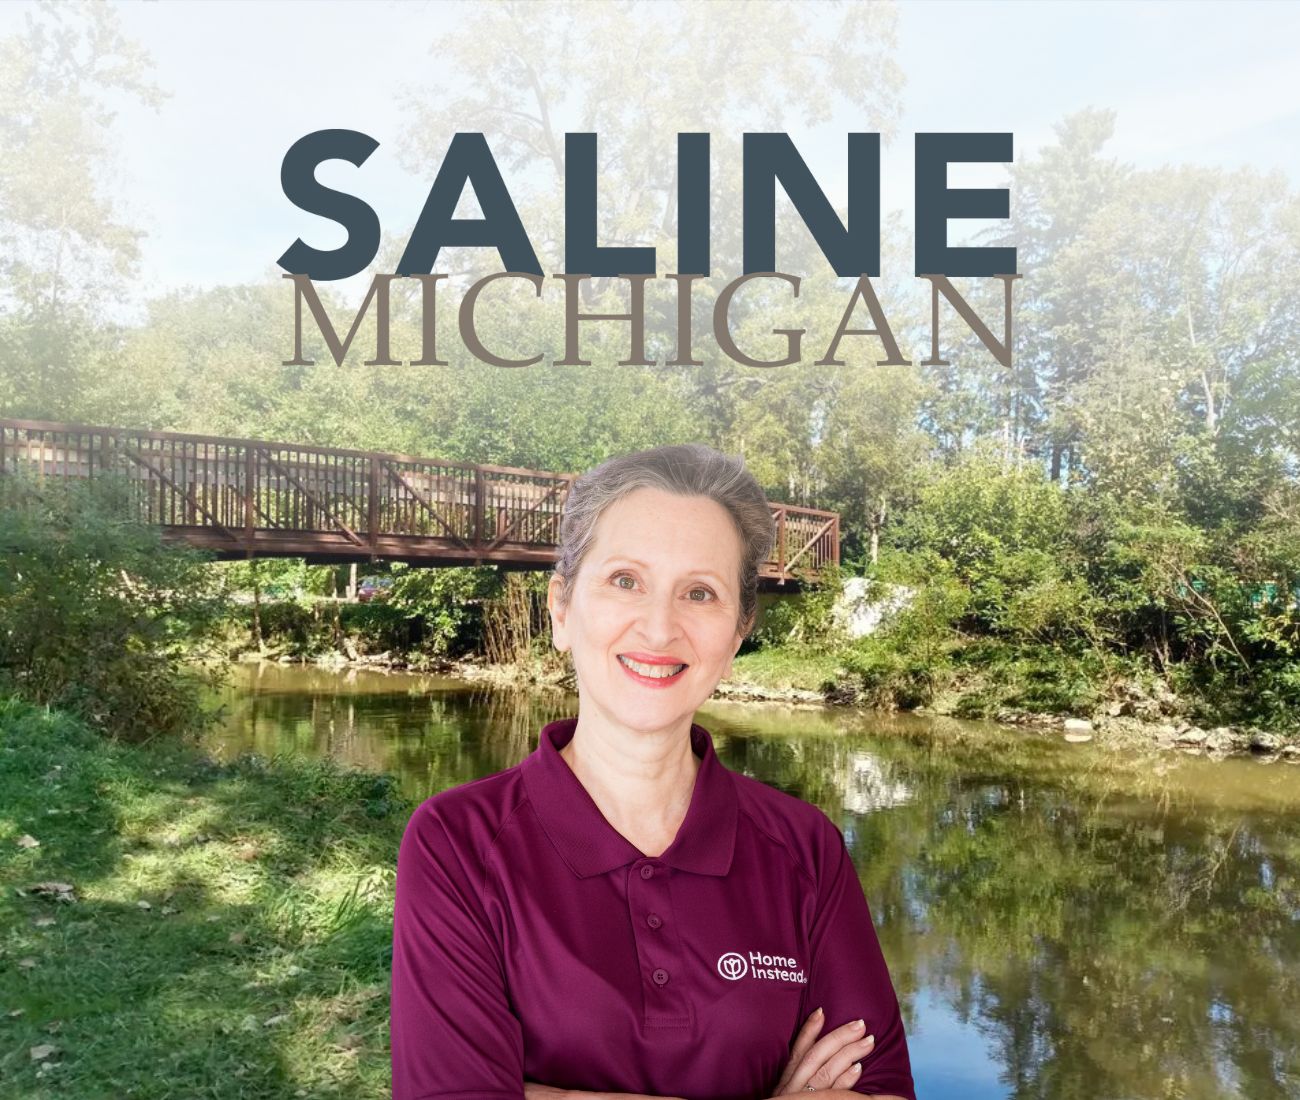 Home Instead caregiver with Saline, Michigan in the background